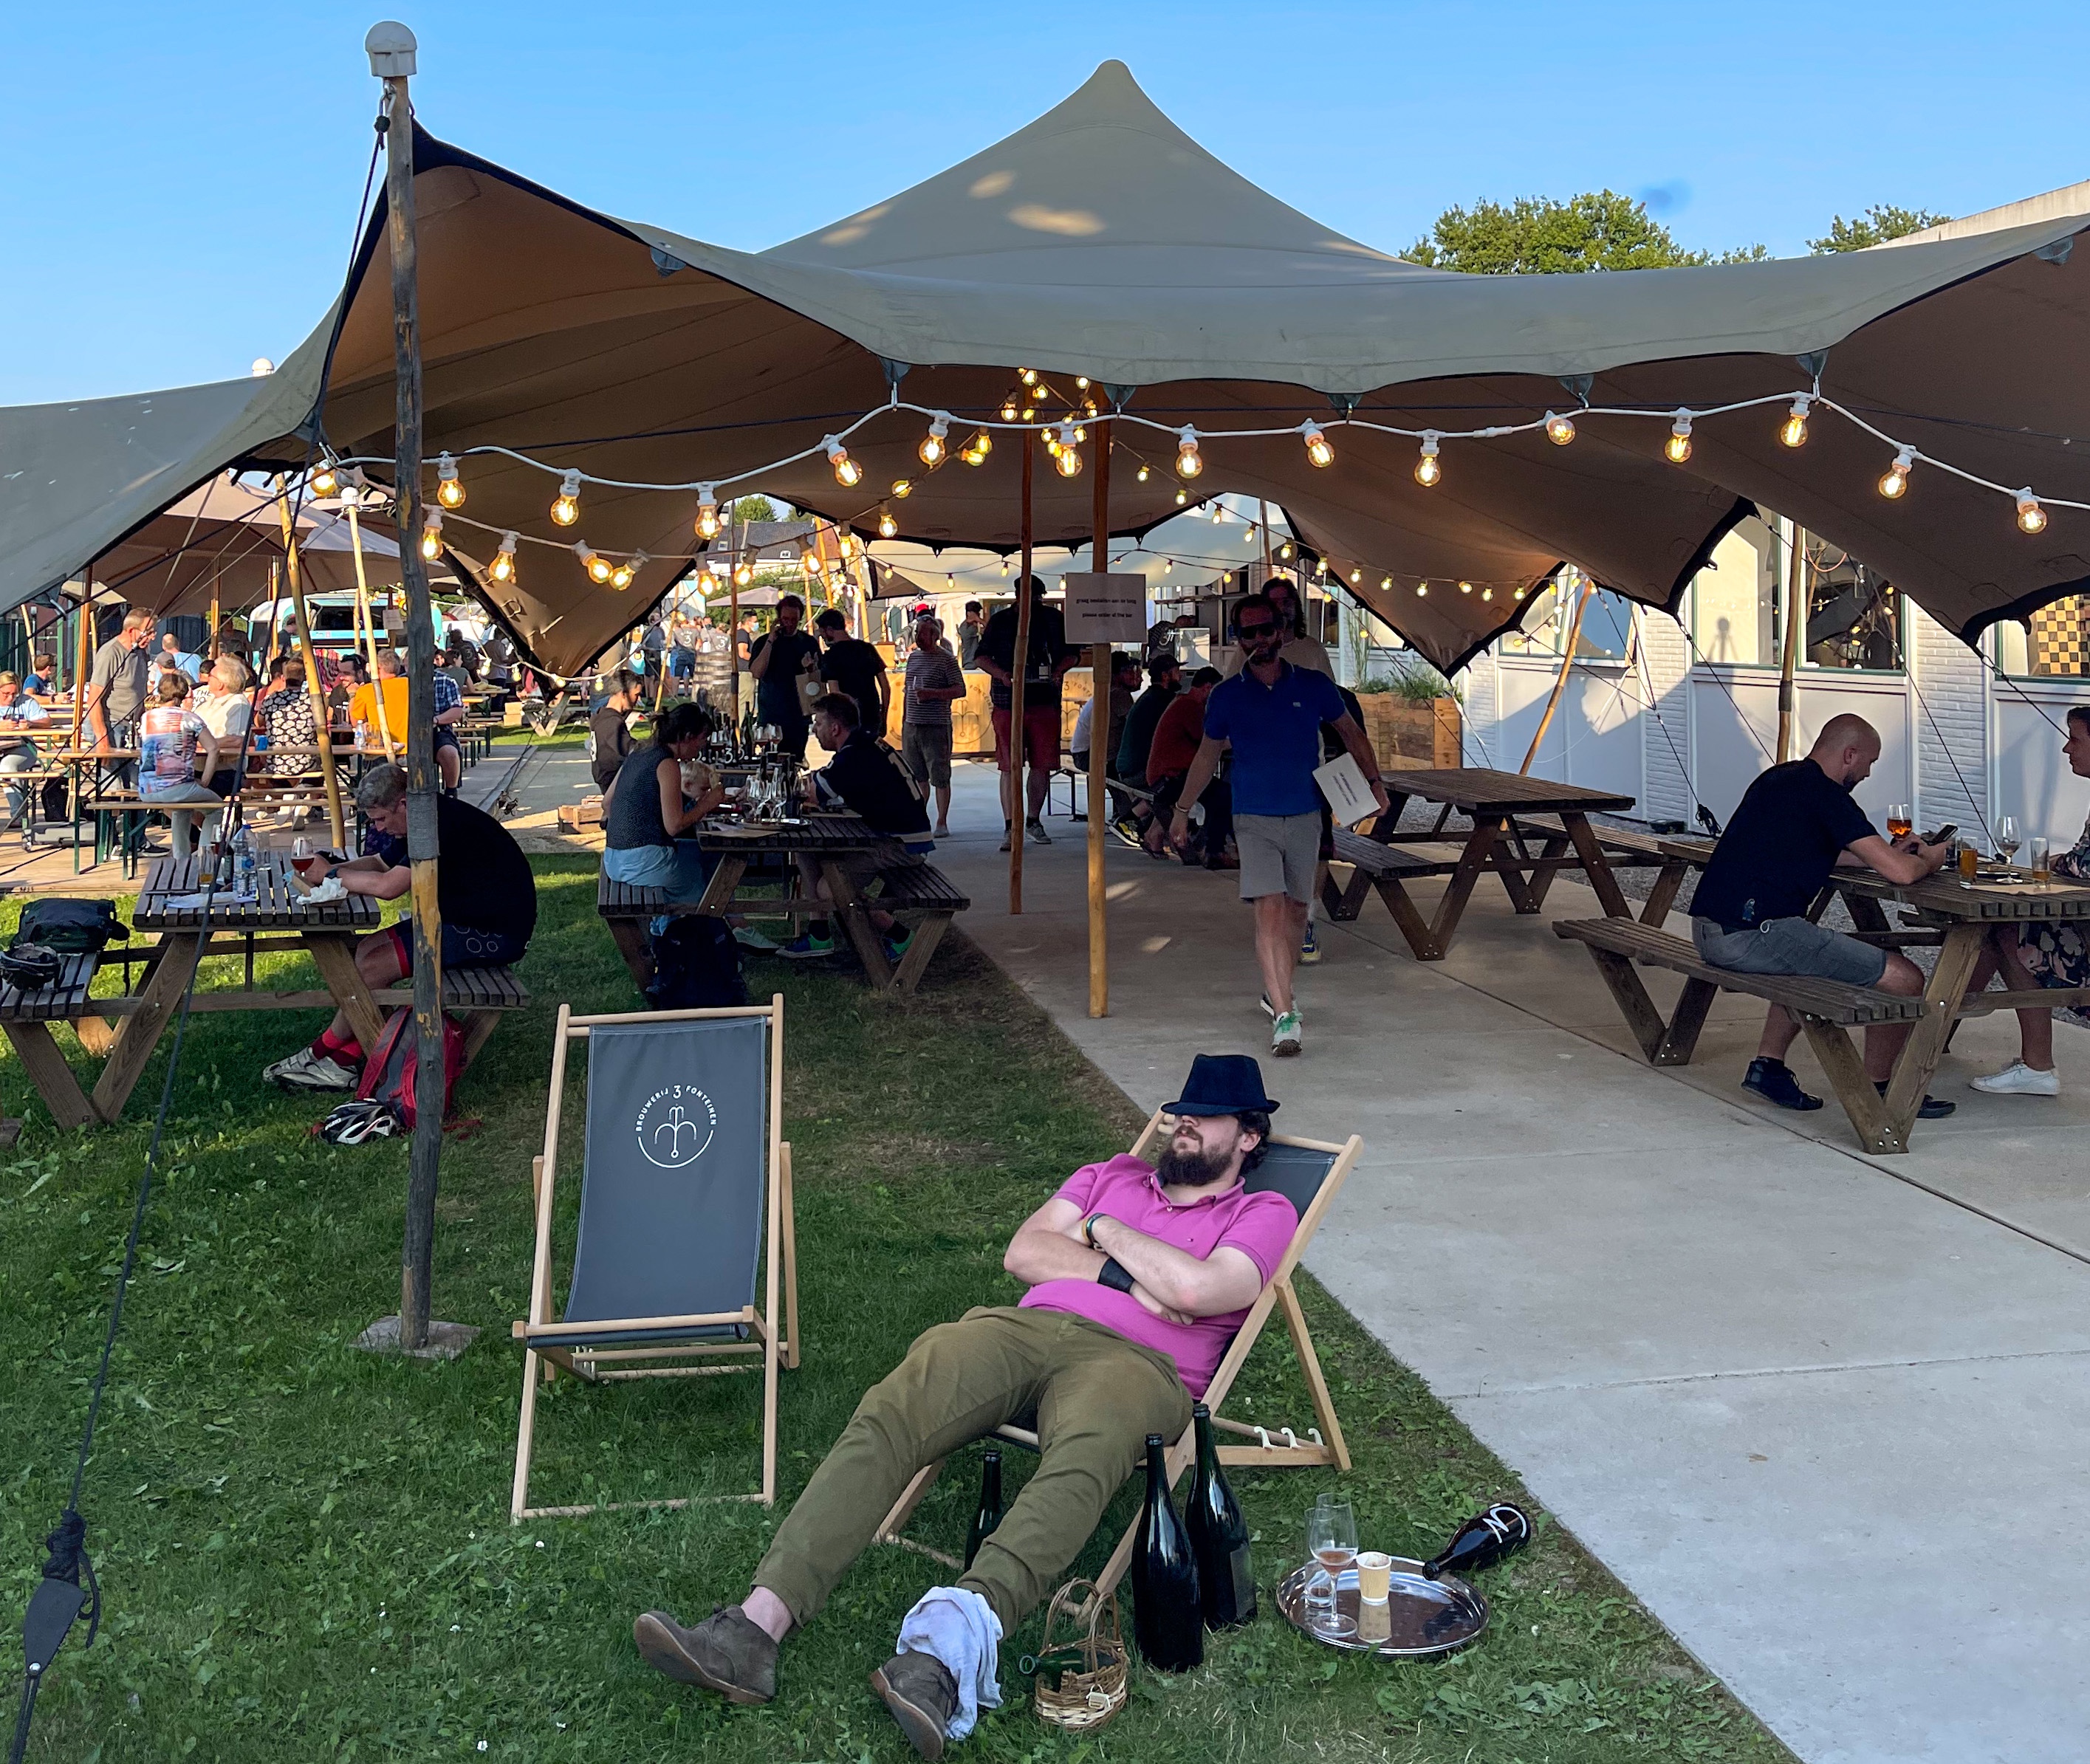 Relaxing at 3 Fonteinen labik-O-droom as evening approaches at Open Beer Days